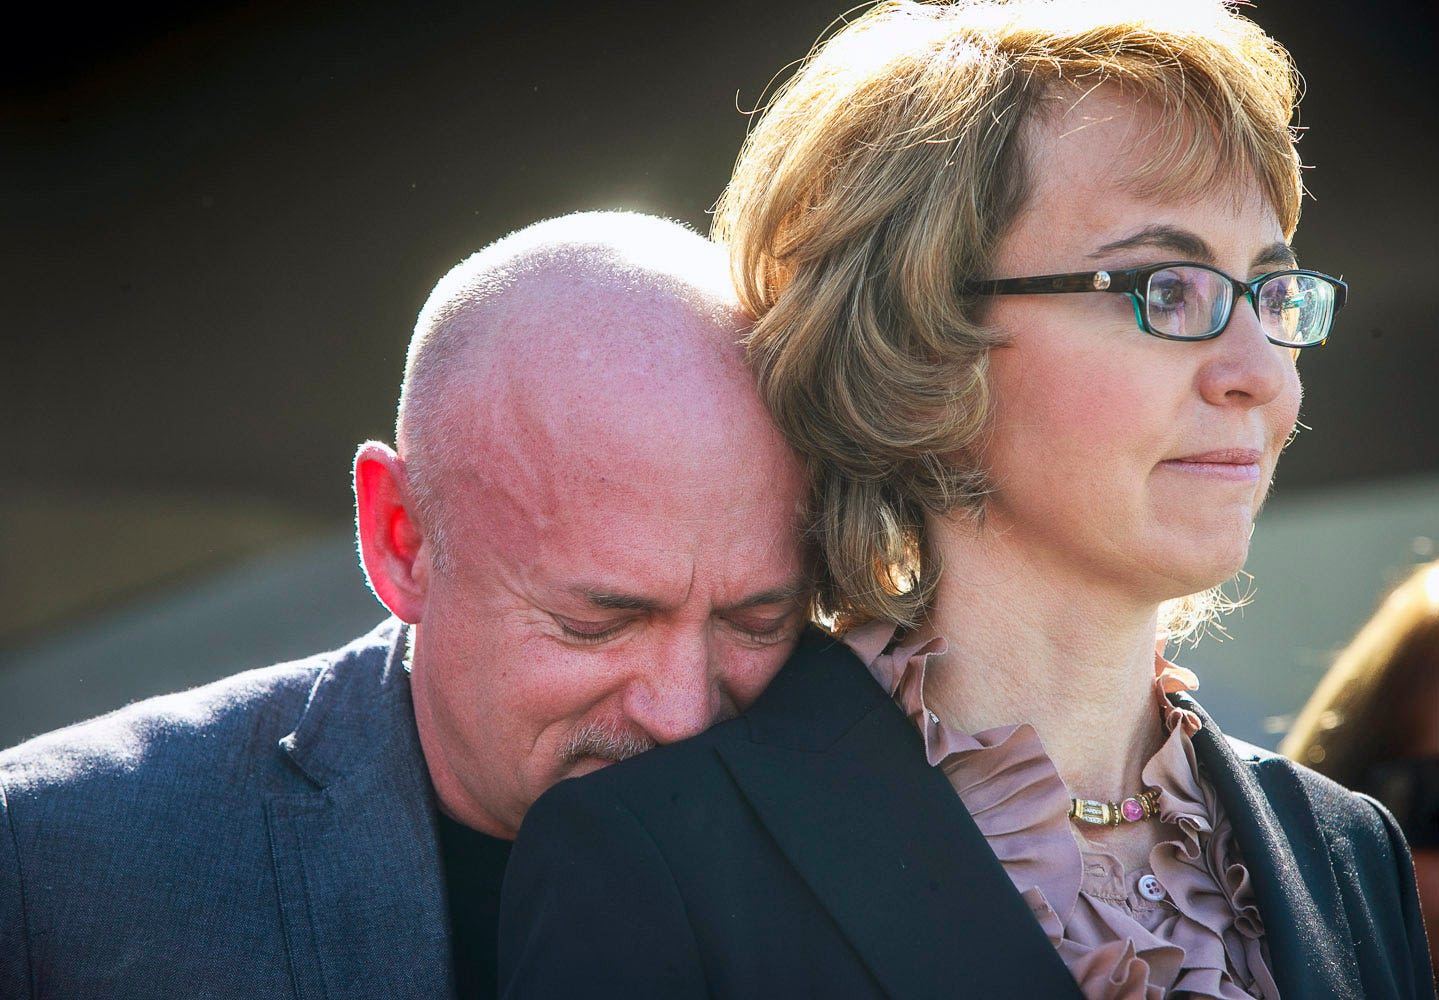 Donald Trump shooting brings words of support from Gabby Giffords, Mark Kelly